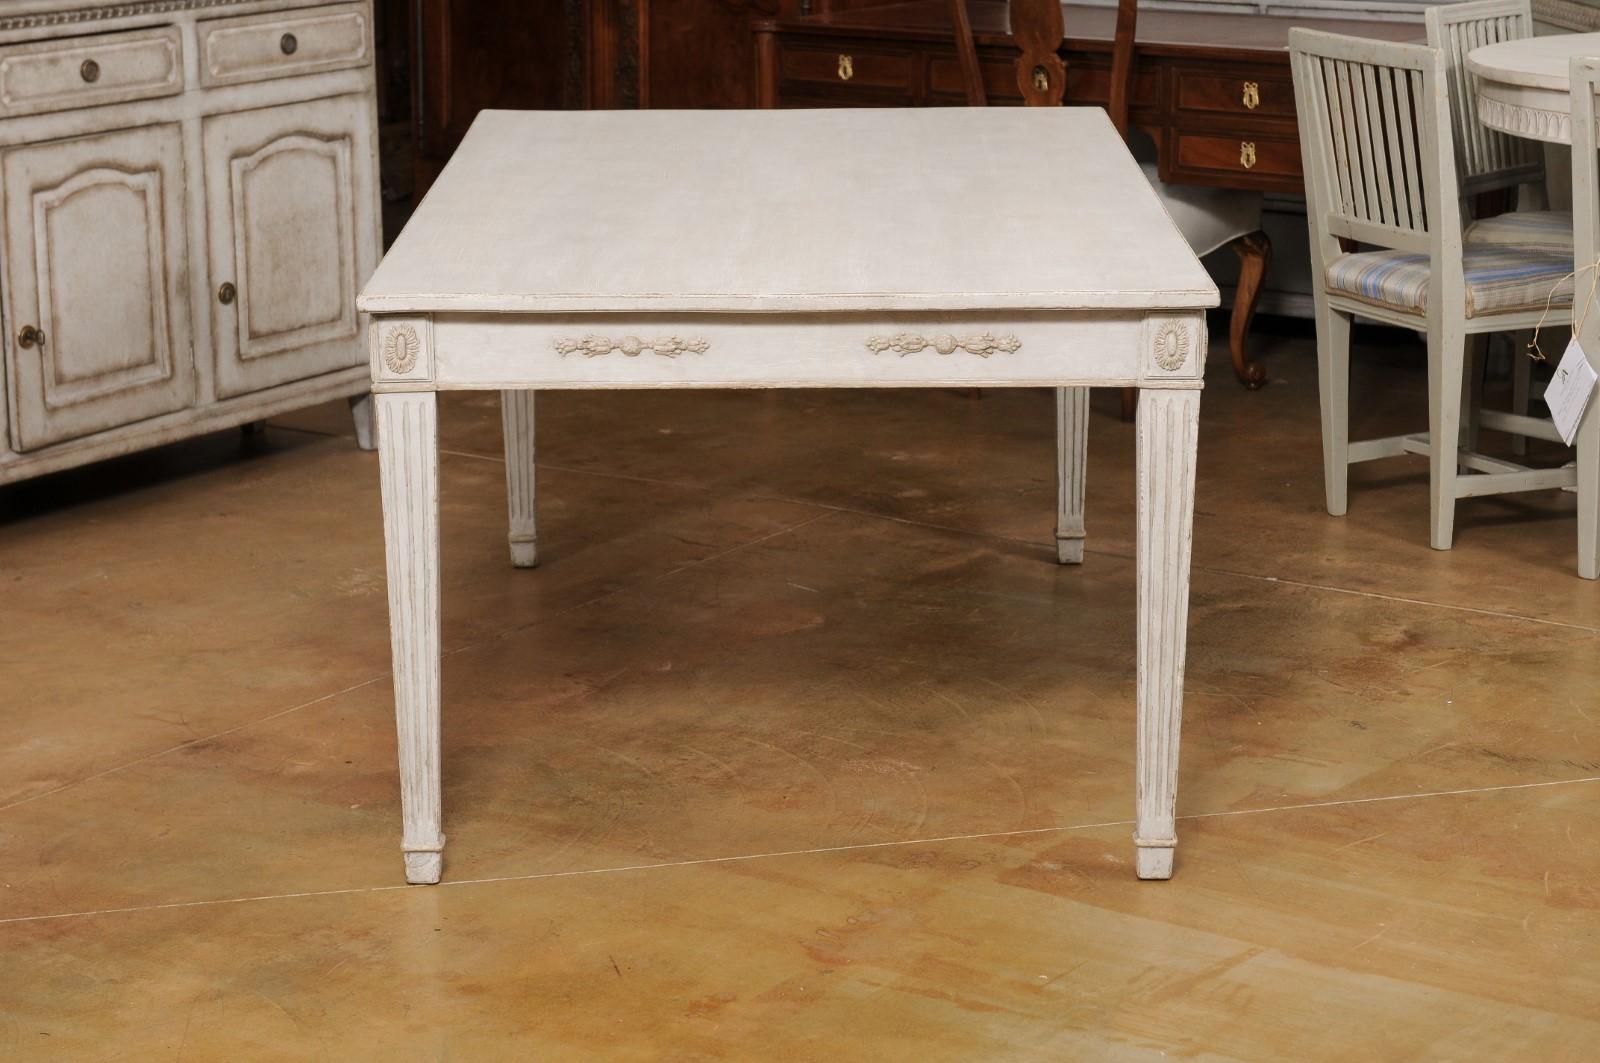 20th Century Swedish 1900 Gustavian Style Dining Table with Carved Apron and Fluted Legs For Sale